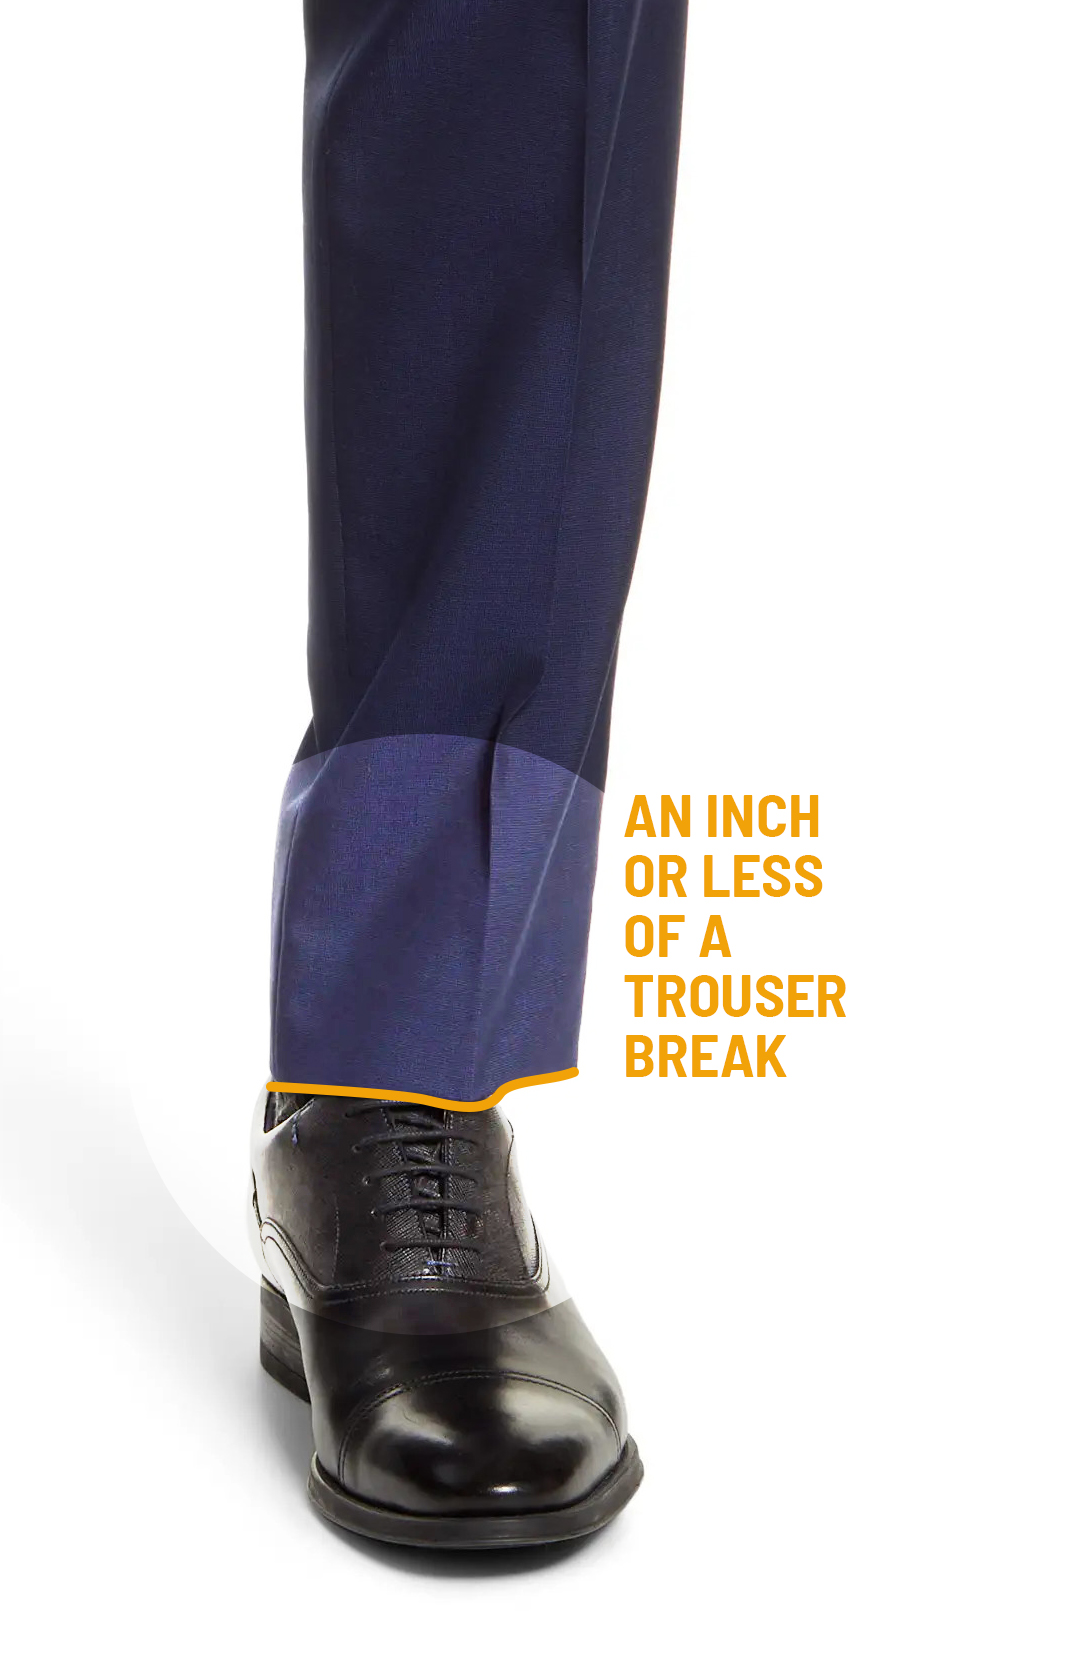 Suit pants length and slight trouser break: one-inch rule